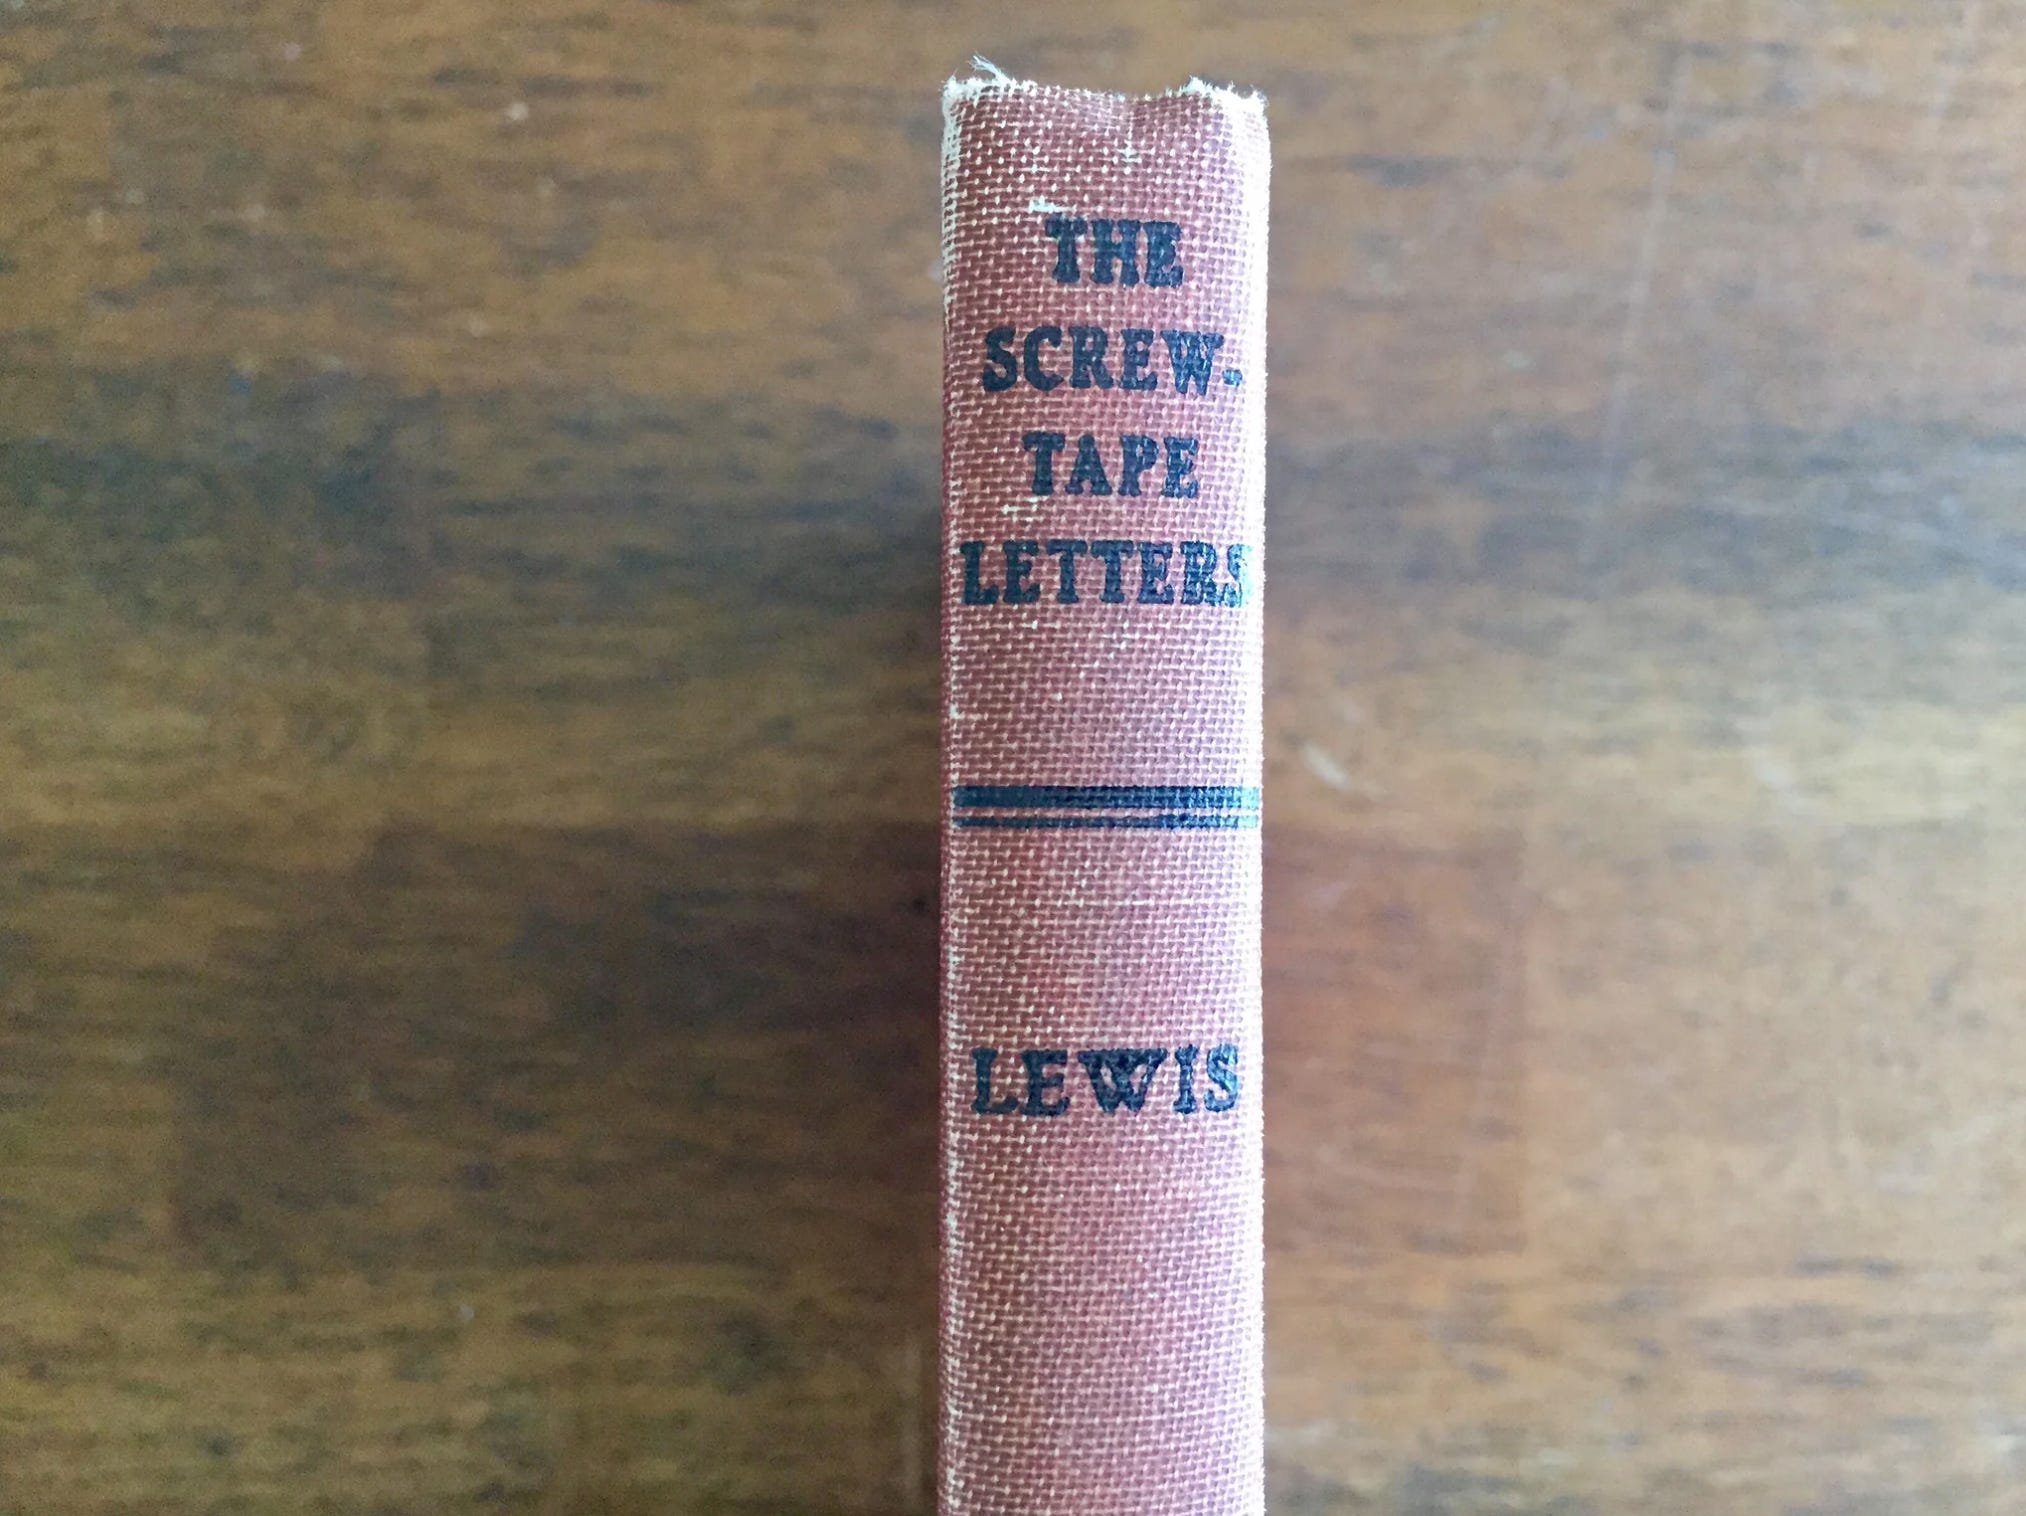 Why Screwtape Letters?